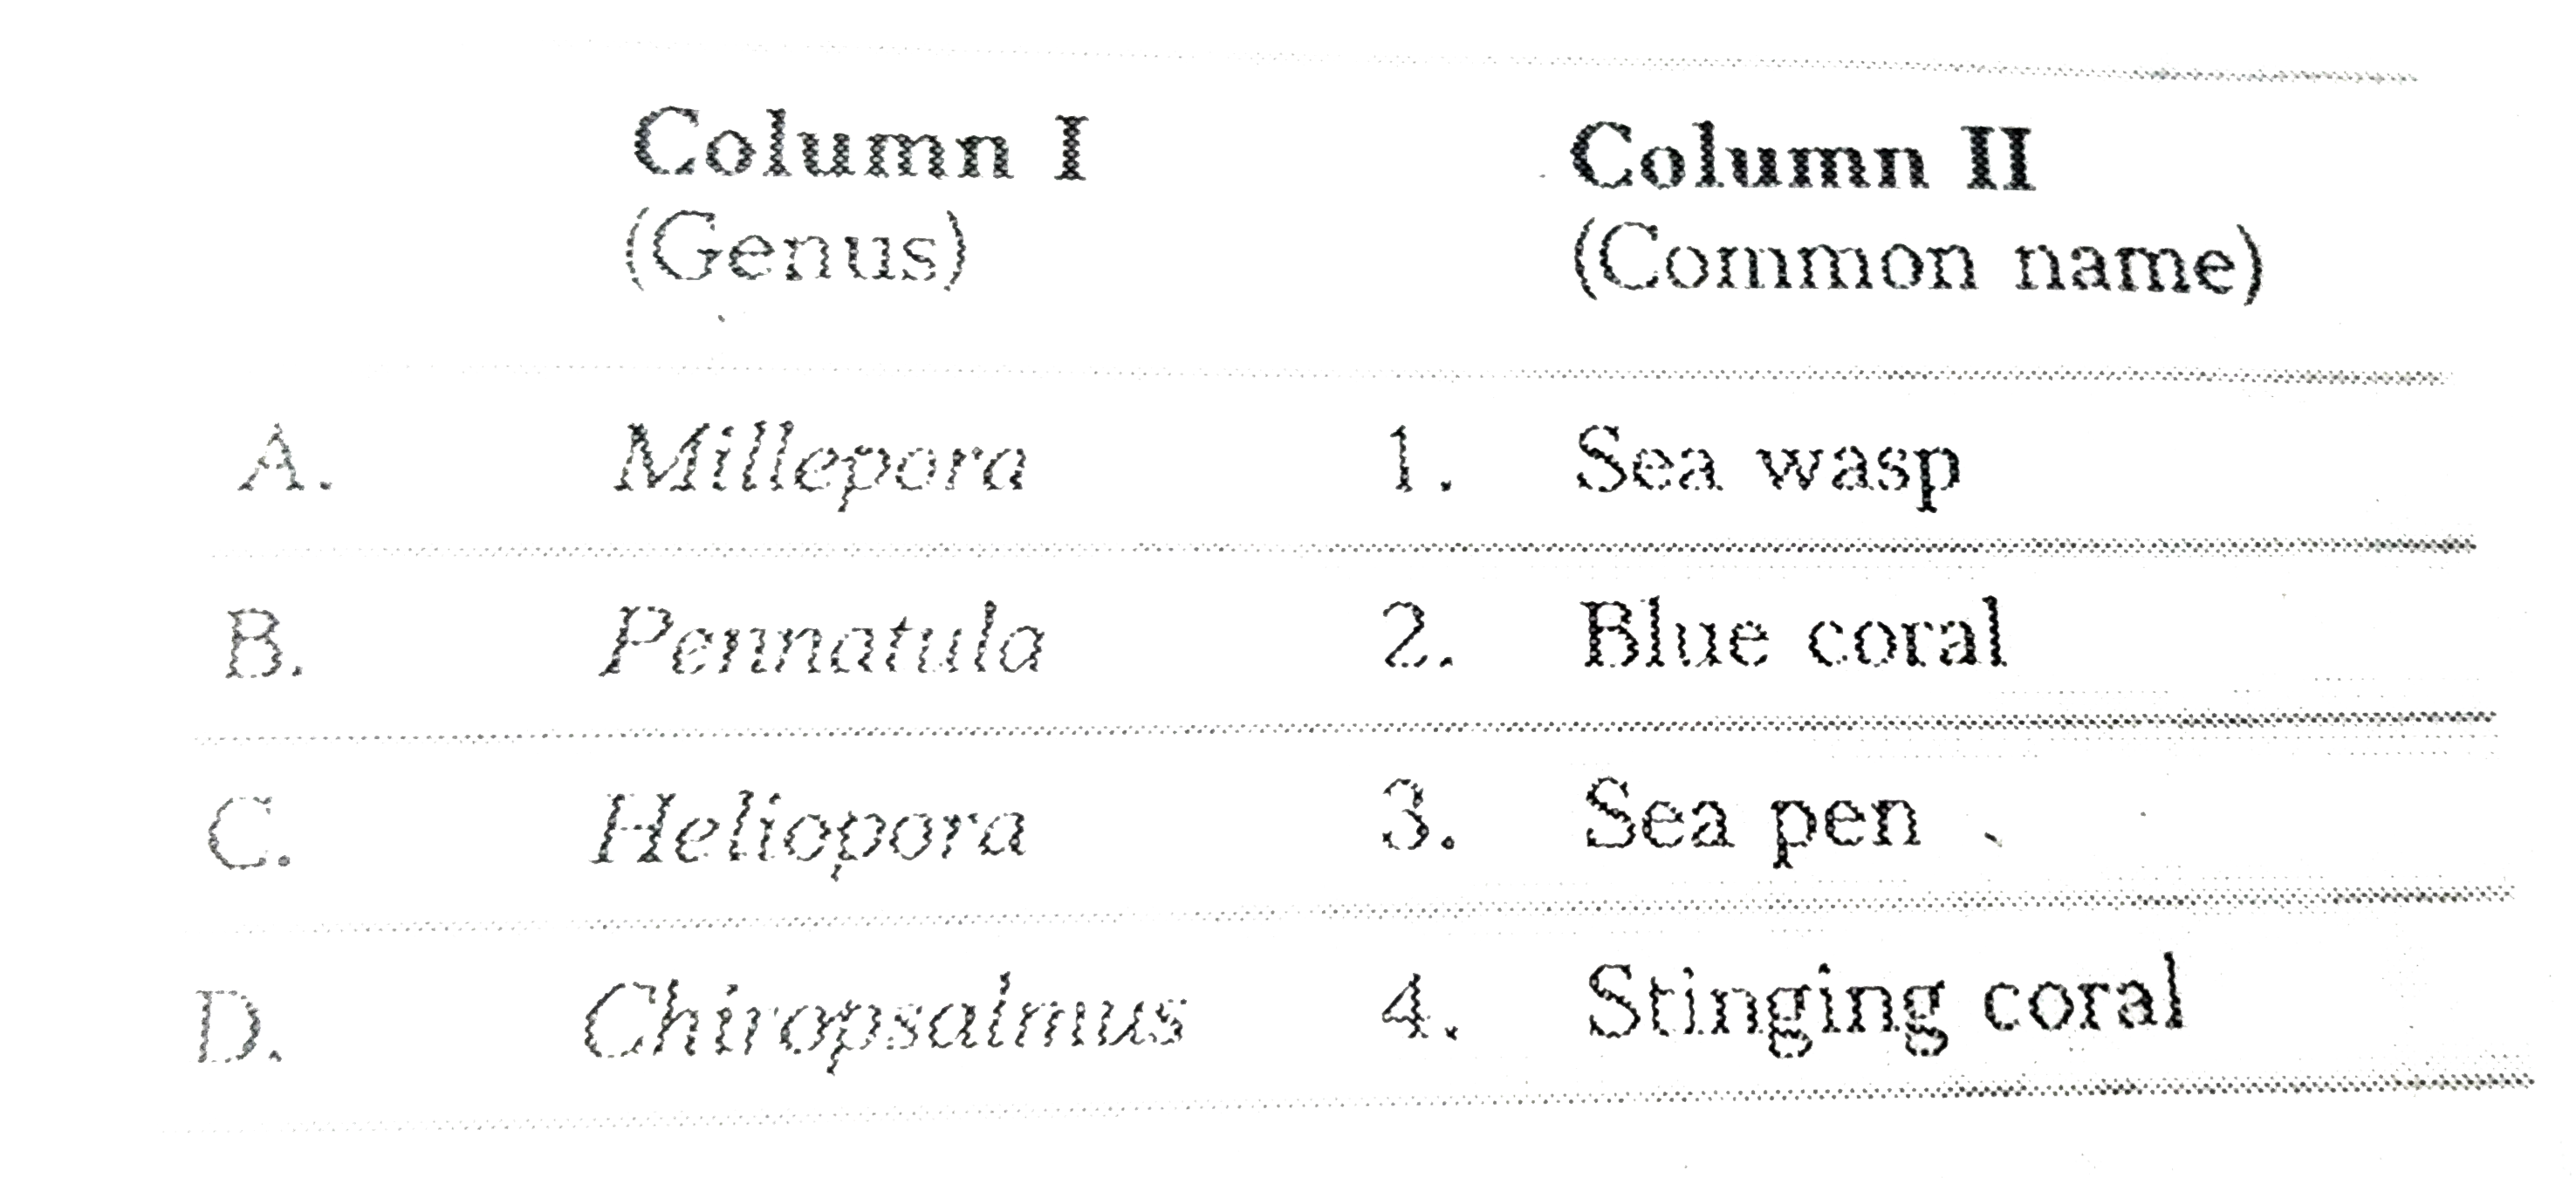 Match the generic name listed under Column I with the common name given under Column II. Choose the answer which givesthe correct combination of the alphabets of the two Columns.